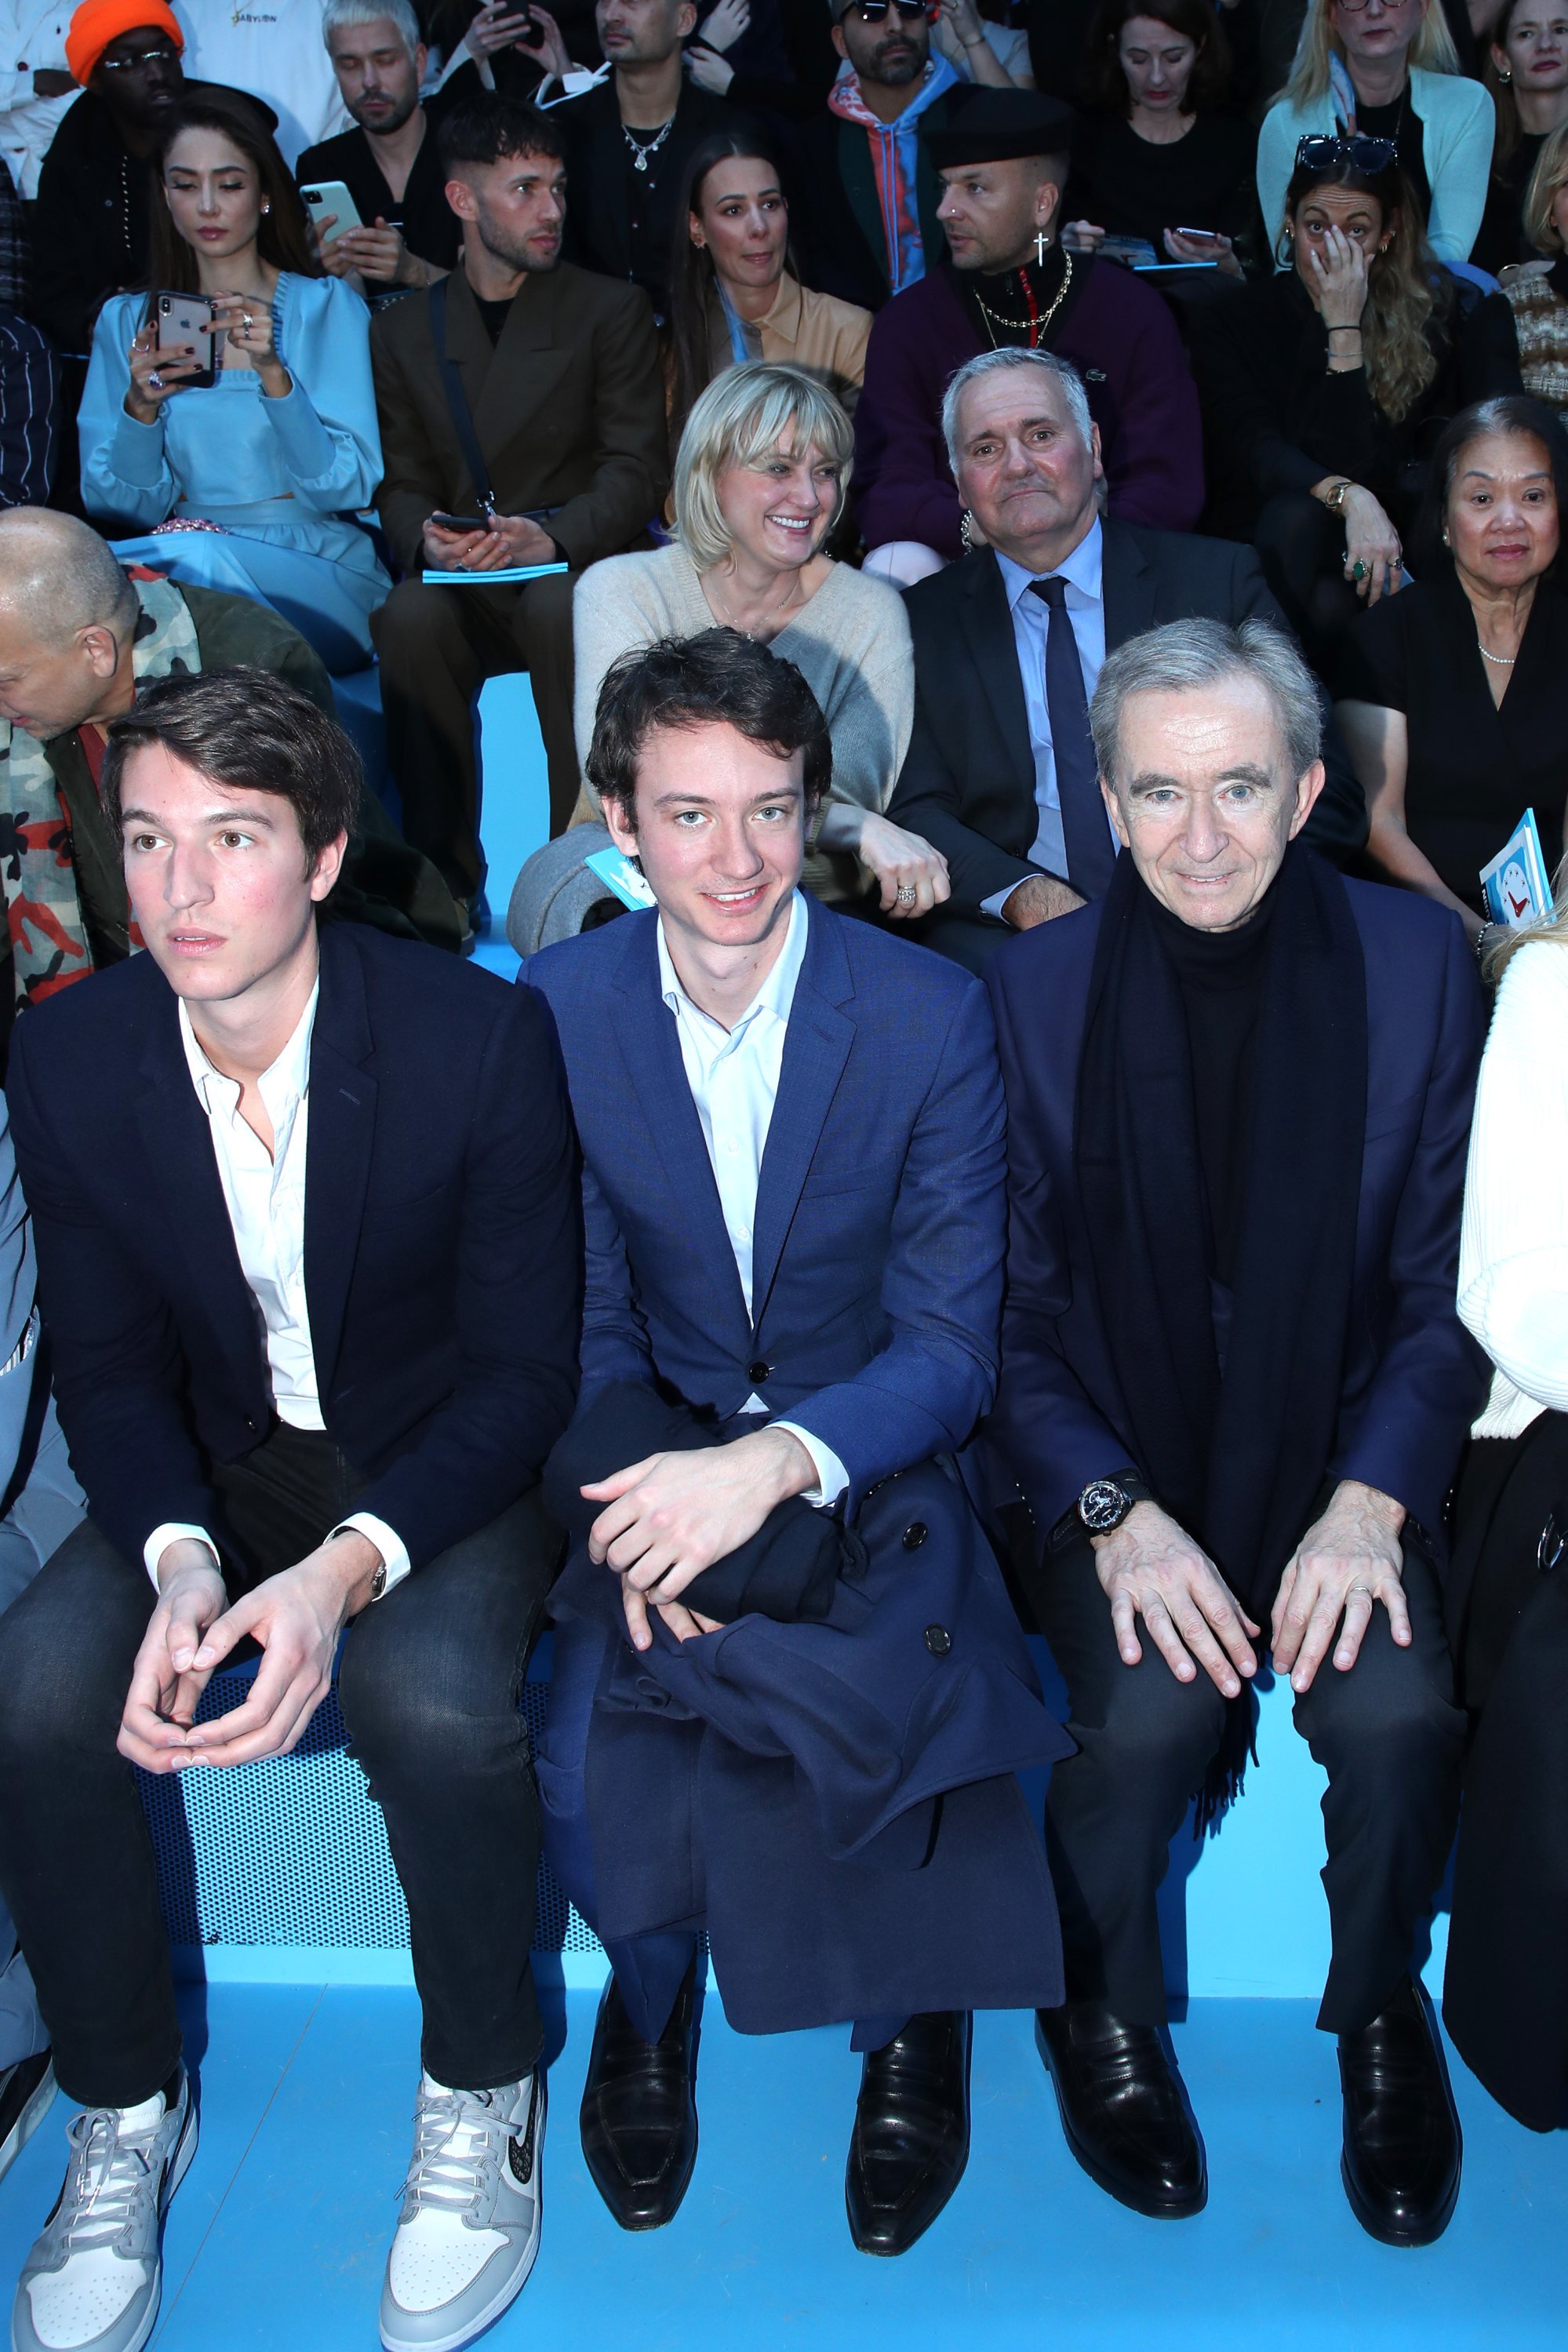 Meet LVMH boss Bernard Arnault's 5 nepo baby kids in fashion: the world's  richest person is now worth over US$200 billion and has Delphine in Dior,  Alexandre at Tiffany & Co. and